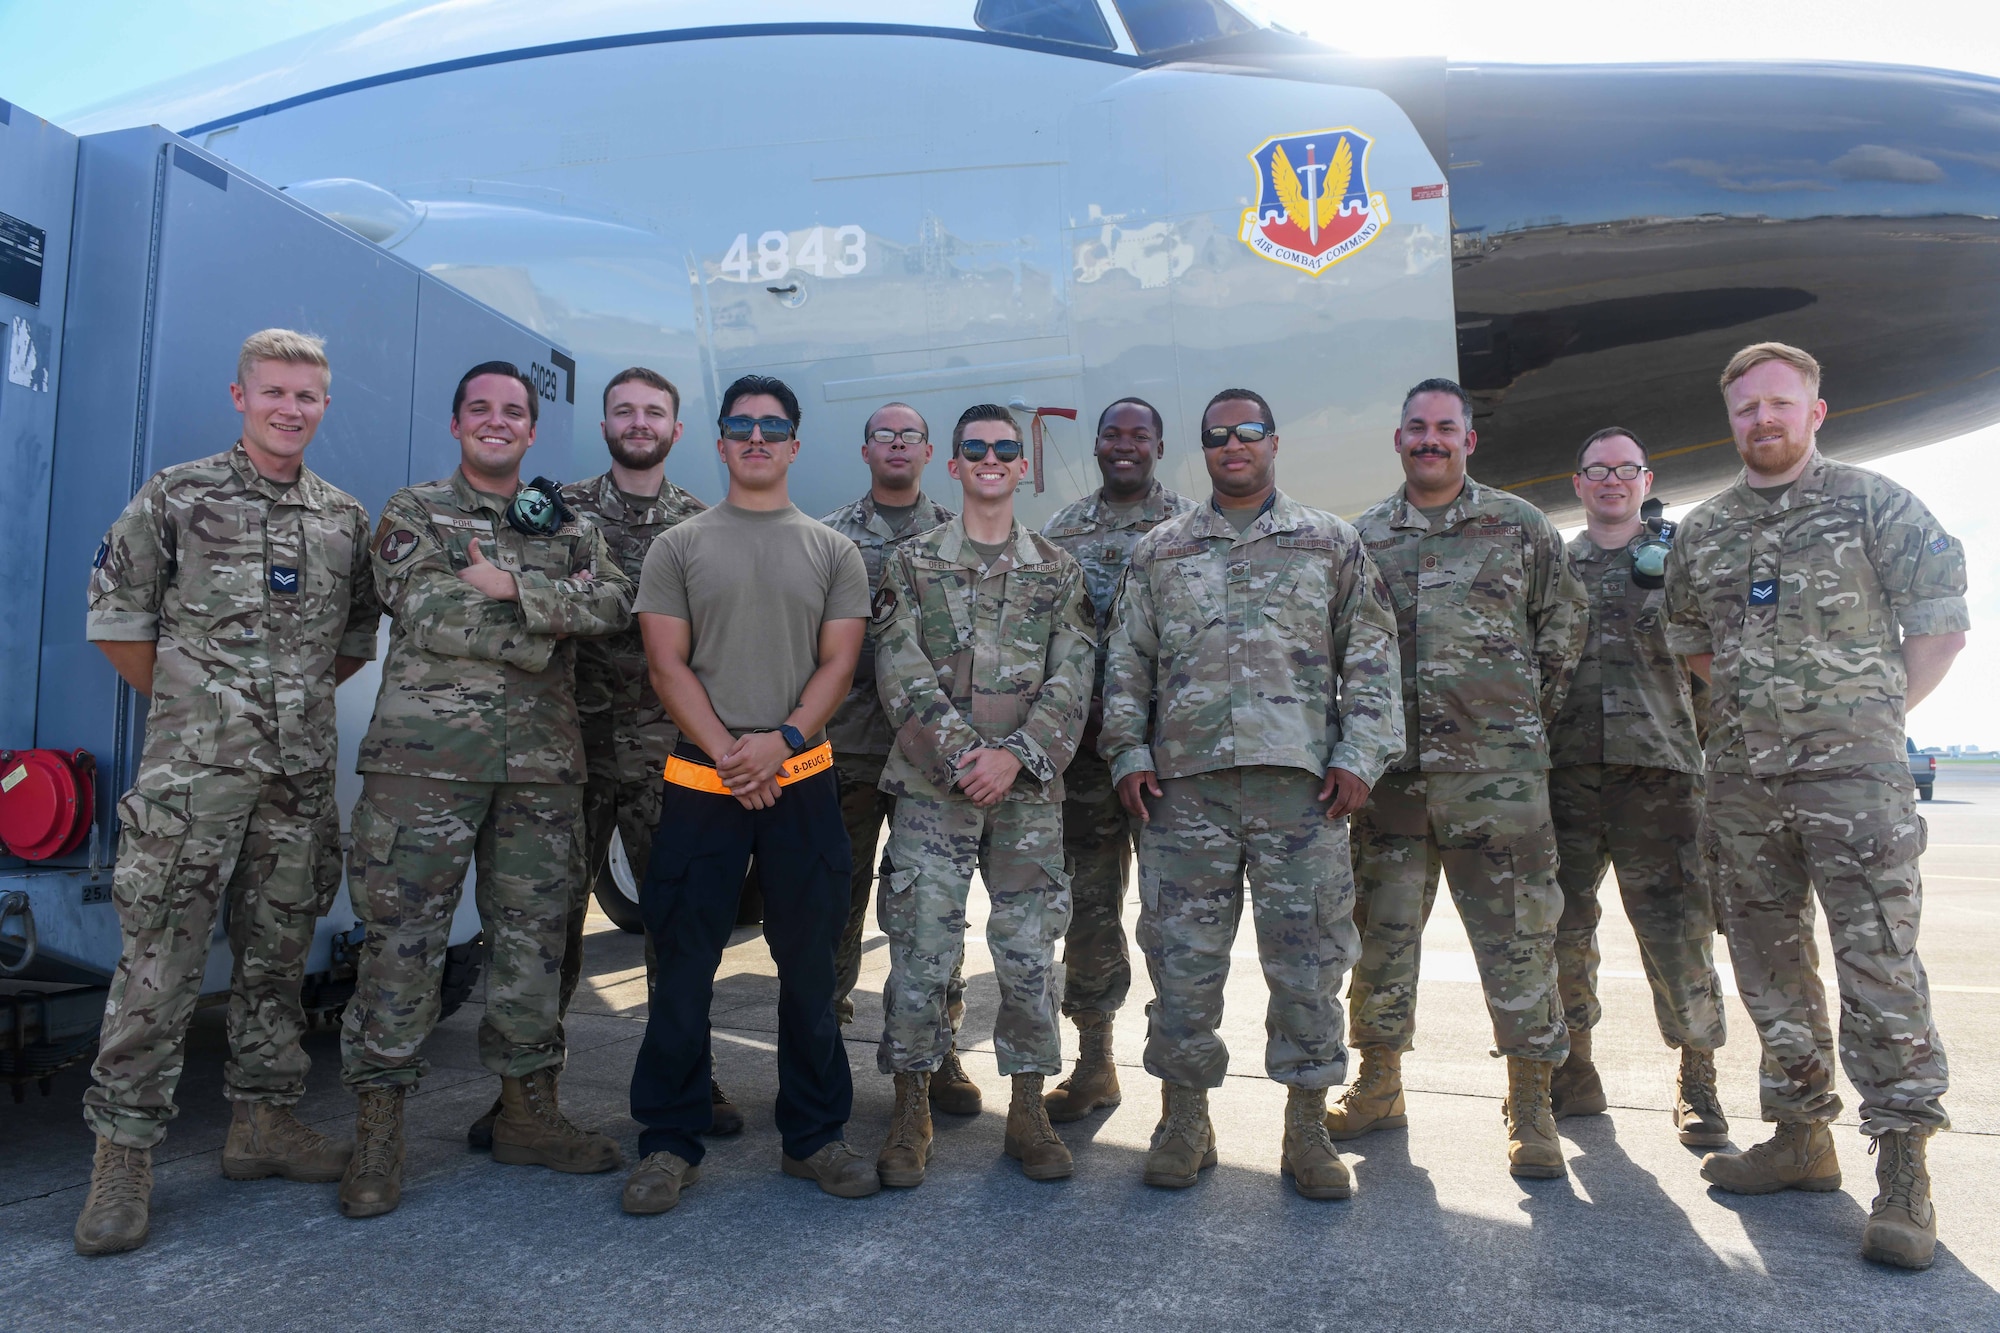 Airmen and Aviators pose for group photo.